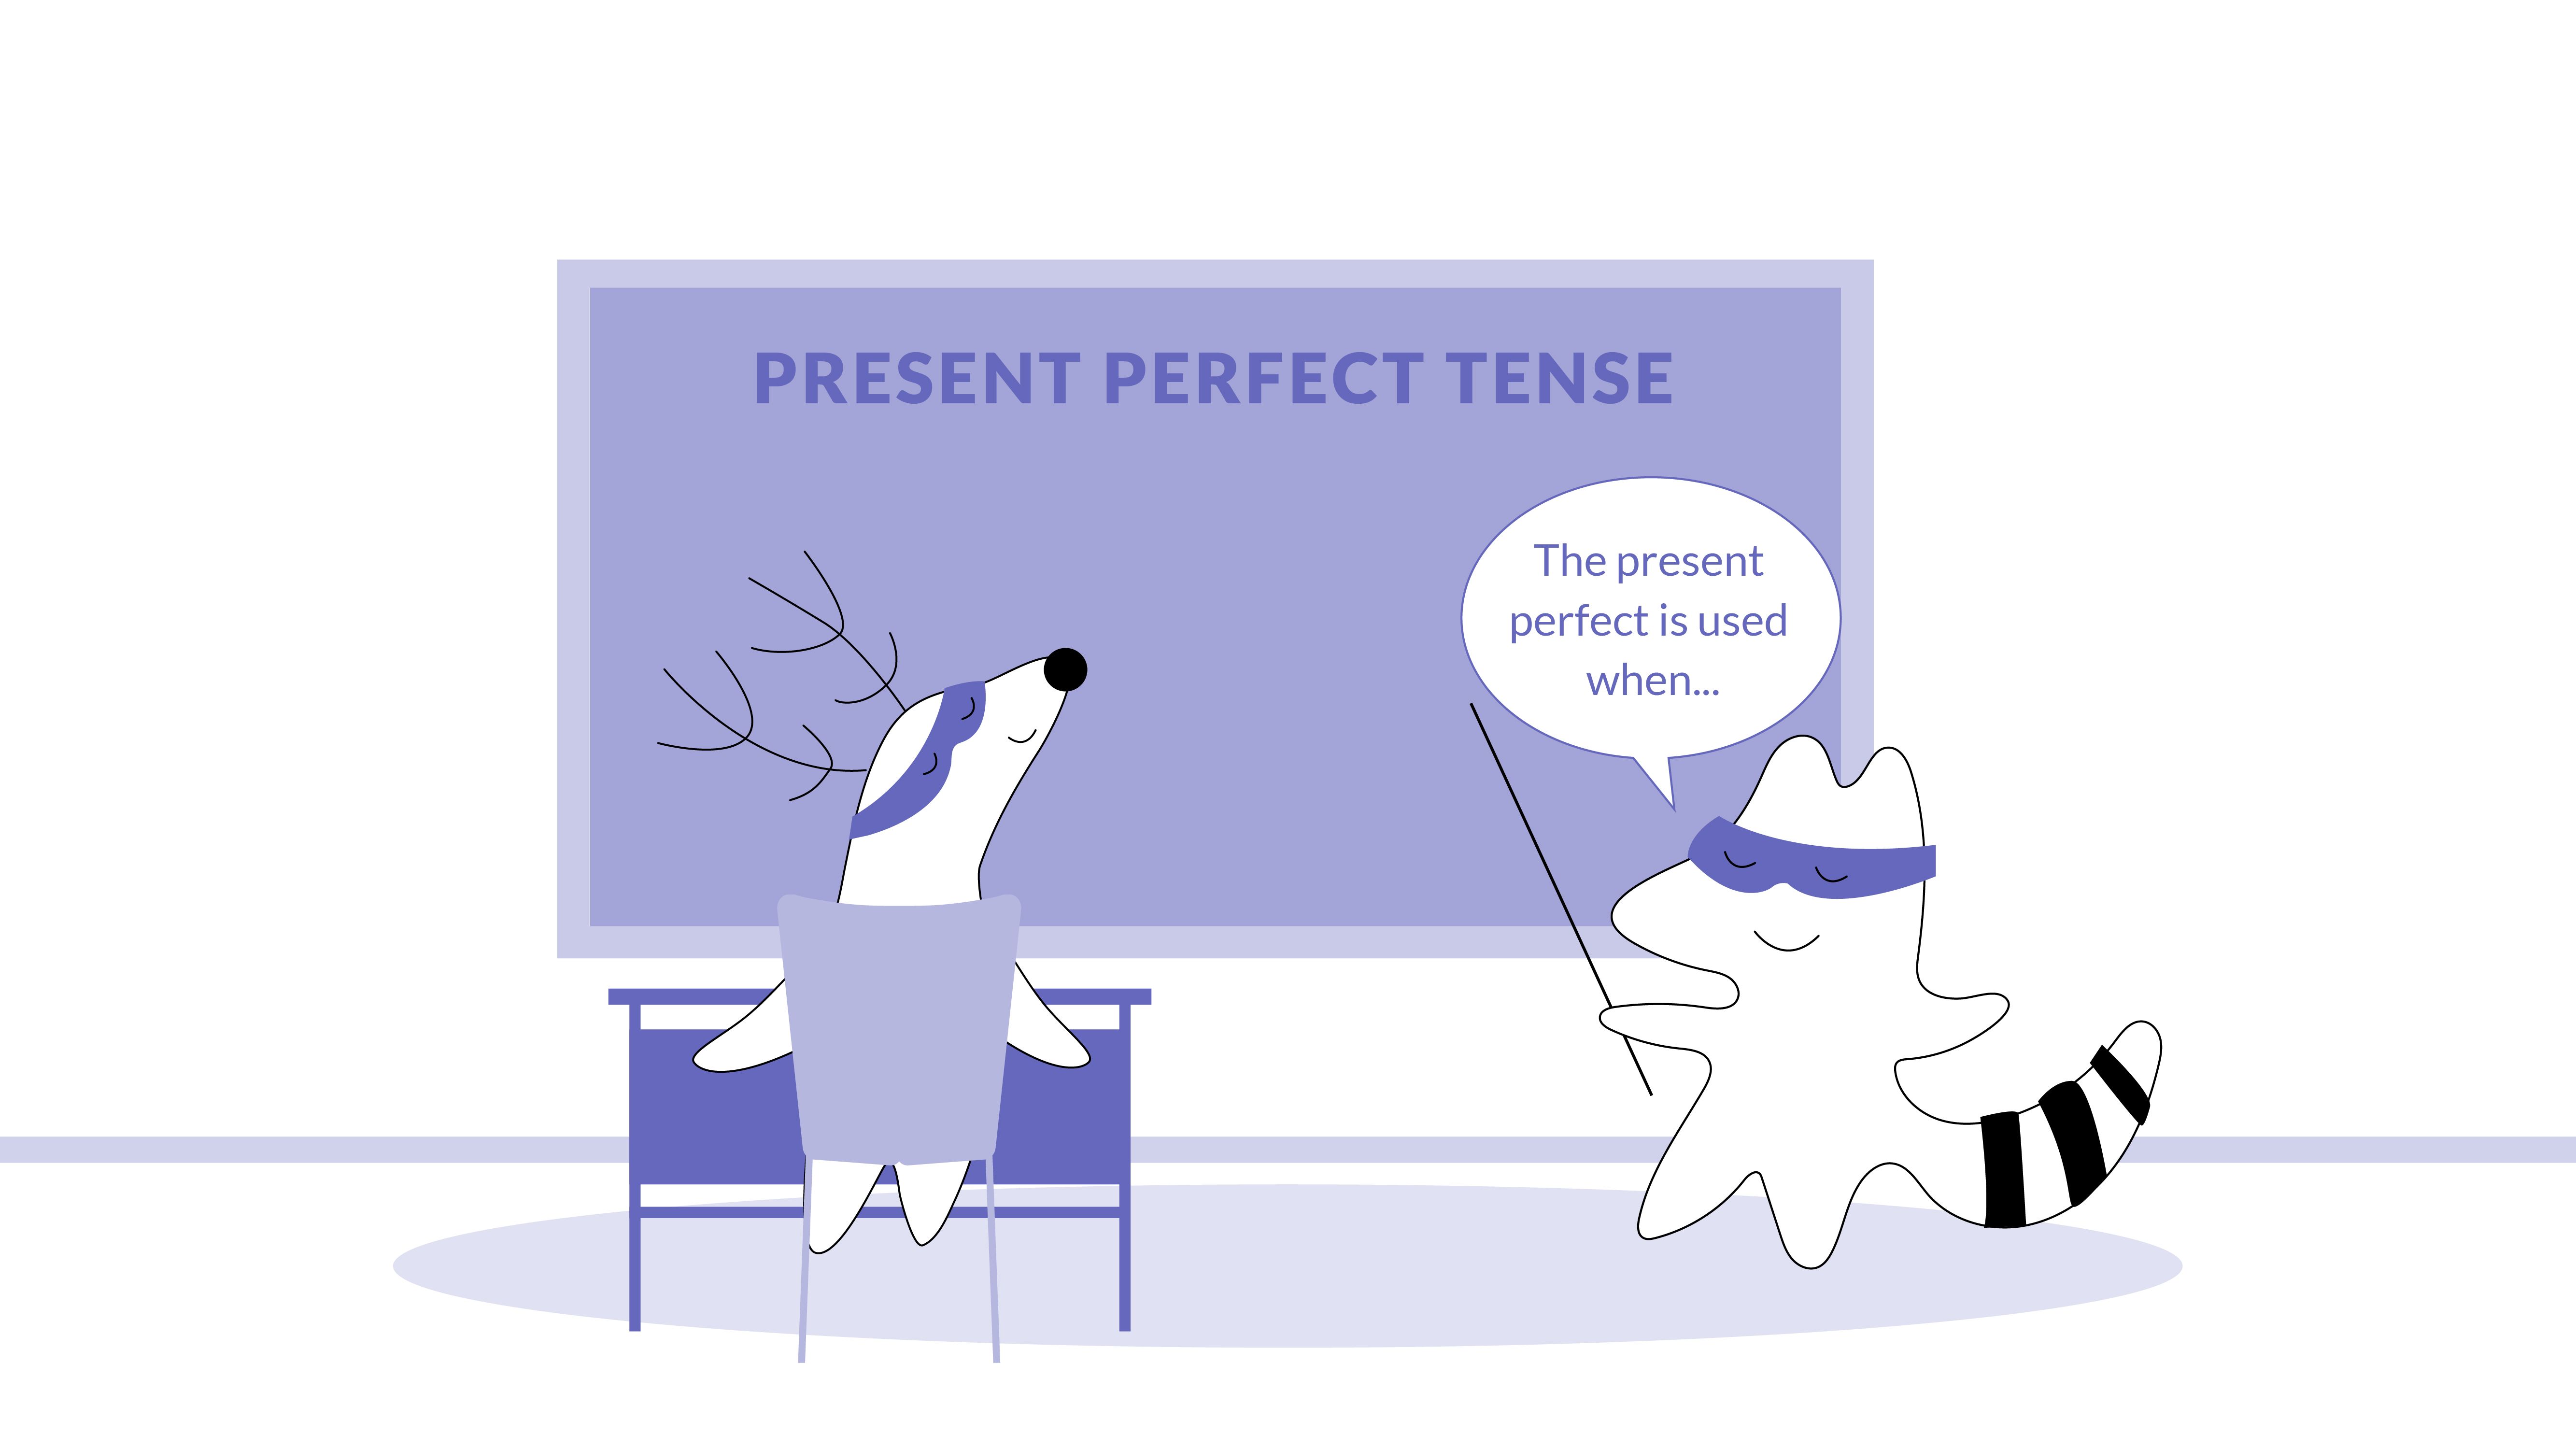 At the classroom, Iggy as a teacher and Soren (the student) are practicing on the blackboard “The present perfect is used when…”